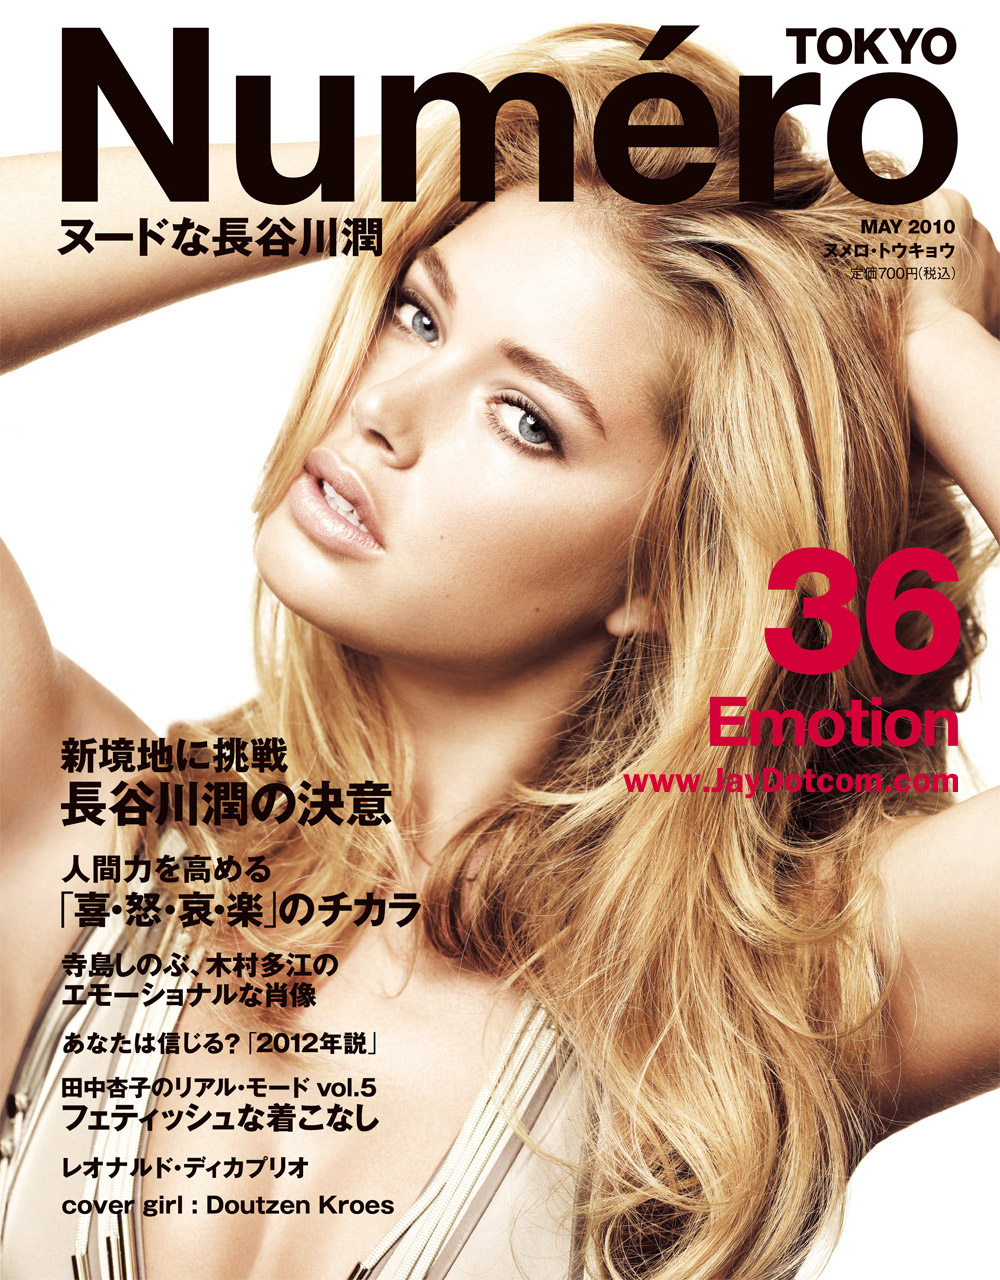 Beautiful Blonde Victoria's Secret Dutch Model Doutzen Kroes Modeling For The Cover Of Numero Tokyo Magazine Modeling For Numero Tokyo Fashion Editorials As One Of The Highest Paid Models In The World.